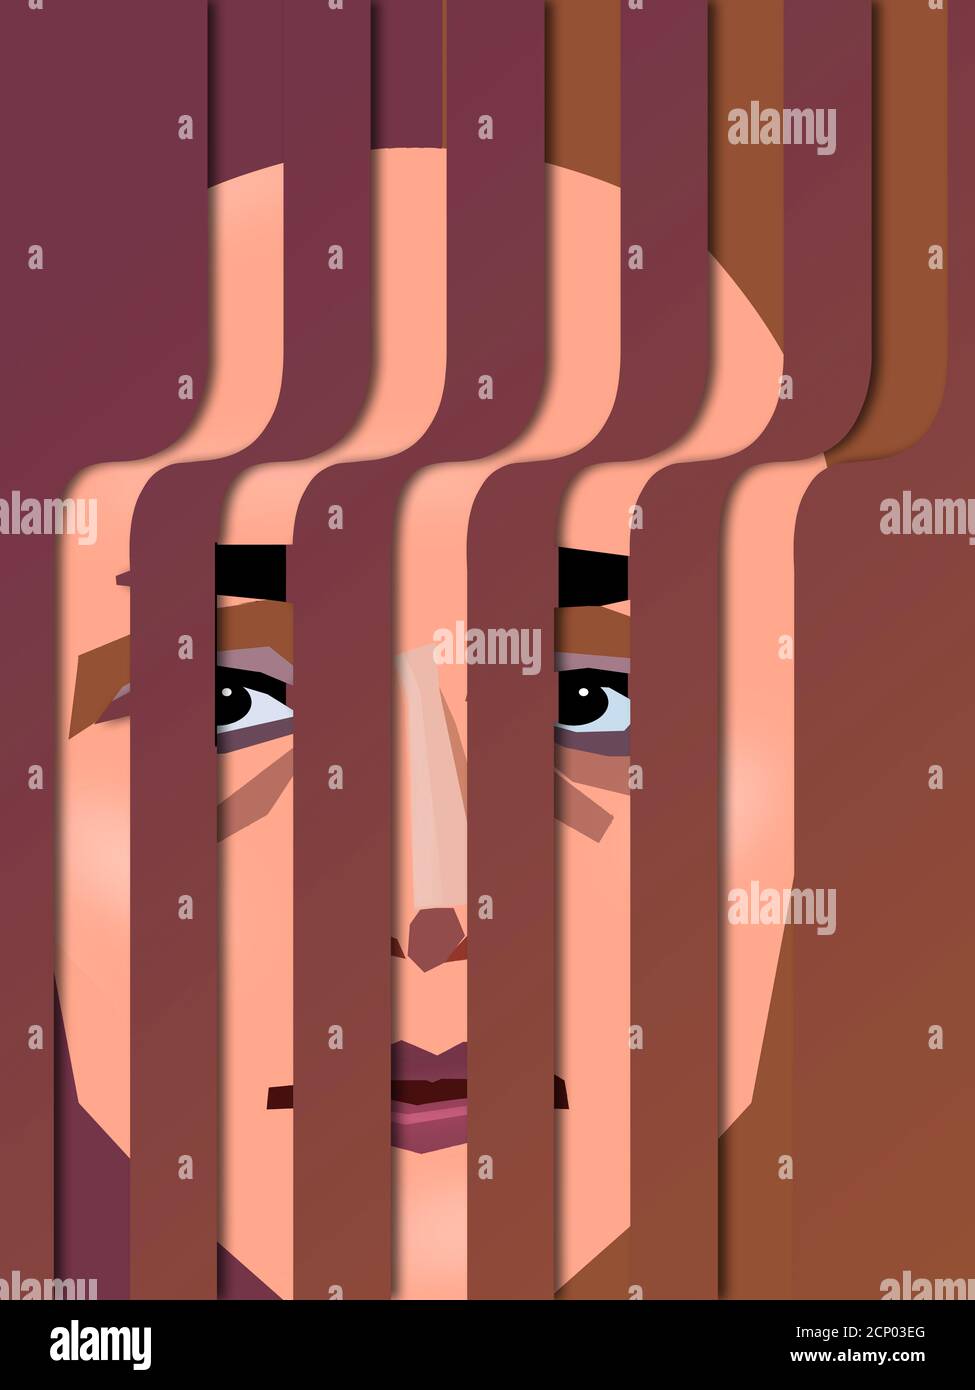 Jail time could be the point of this 3-D illustration of a face behind curving bars or ribbons of color. Stock Photo